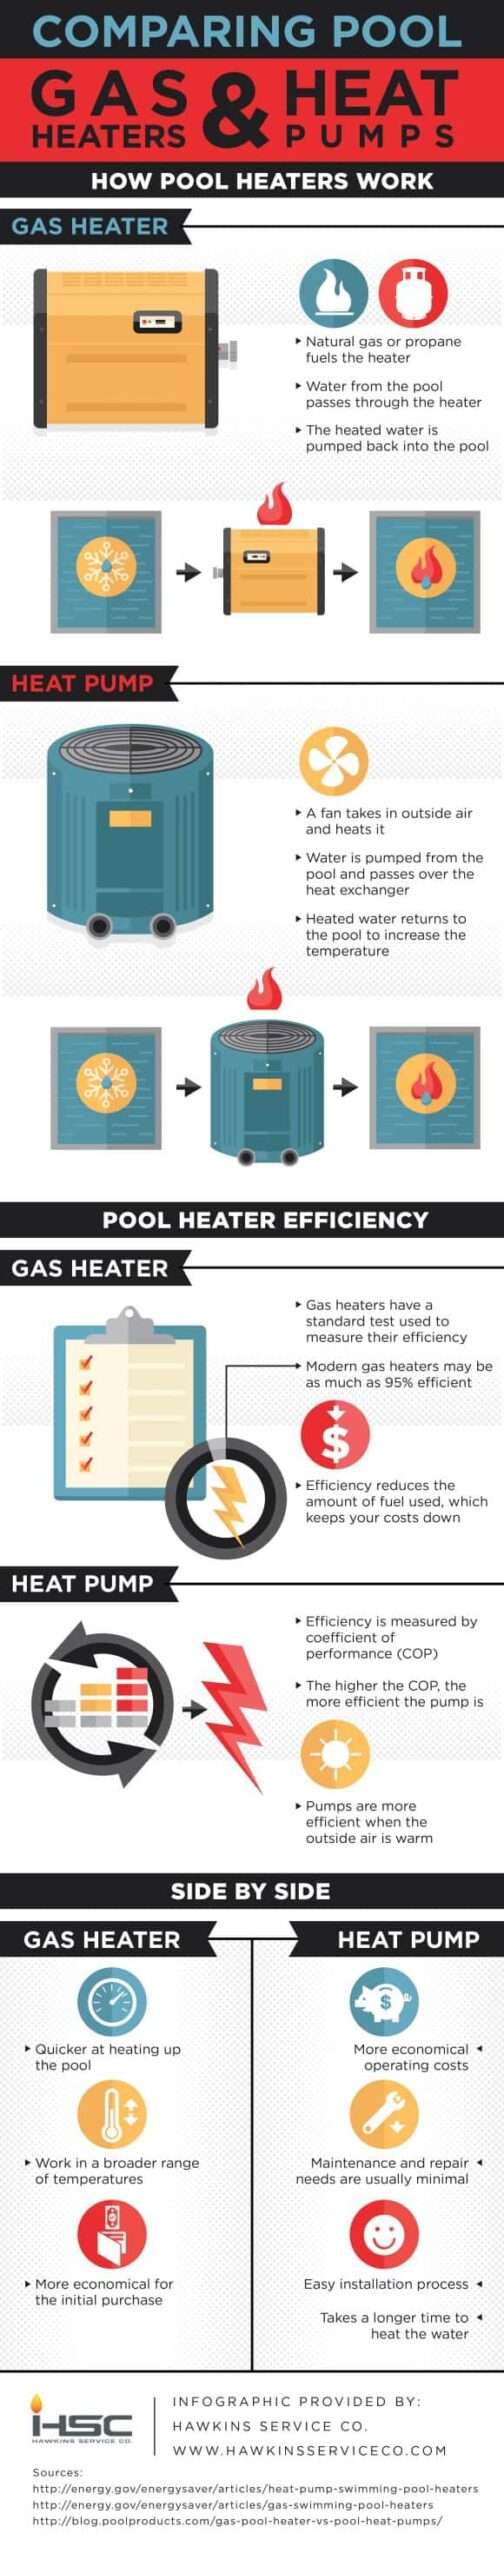 gas heater and heat pumps infographic scaled